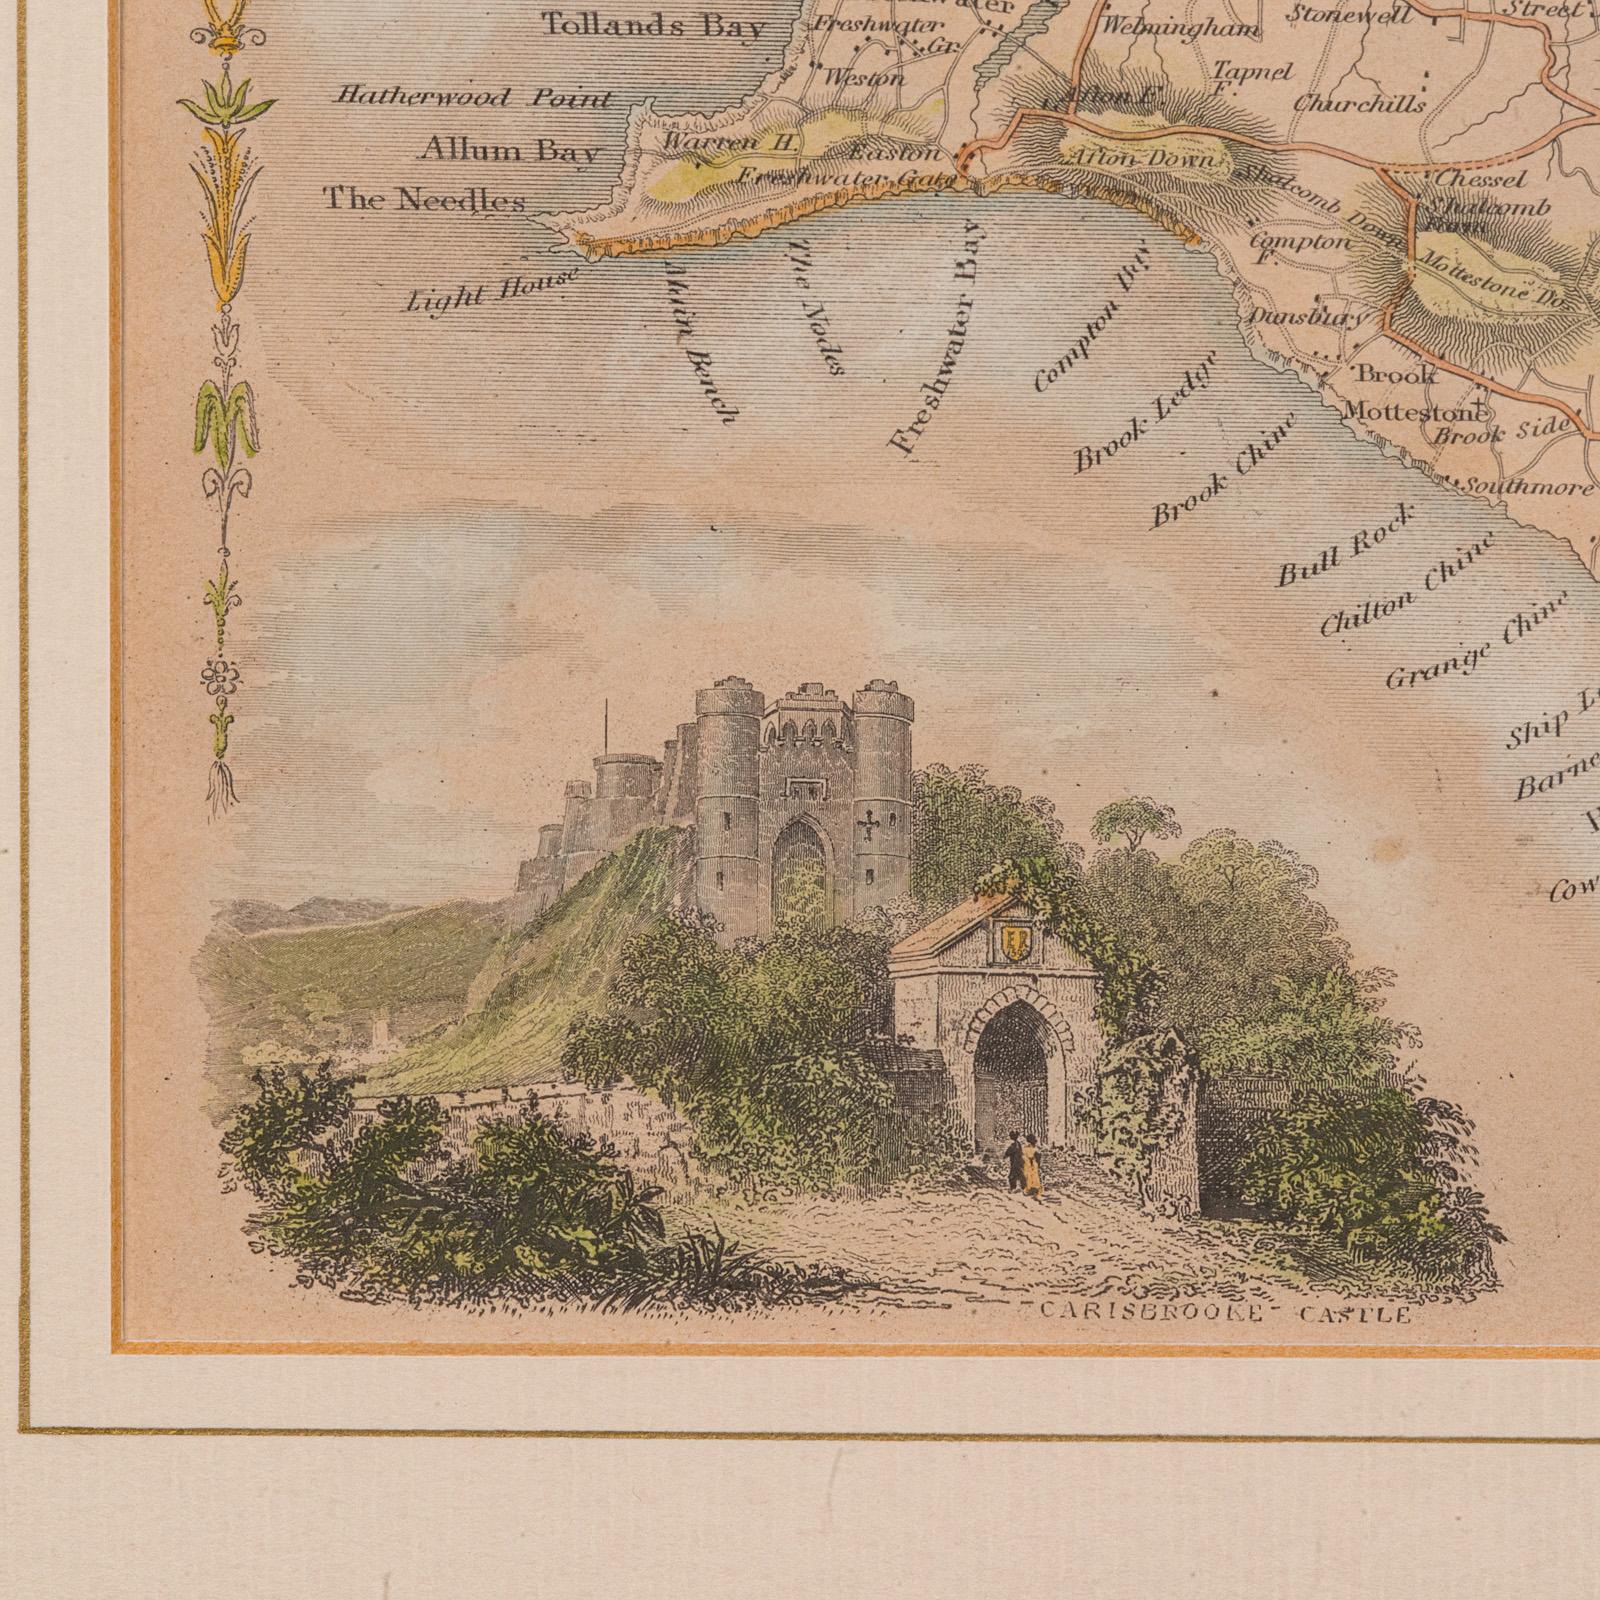 Wood Antique Lithography Map, Isle of Wight, English, Framed, Engraving, Cartography For Sale